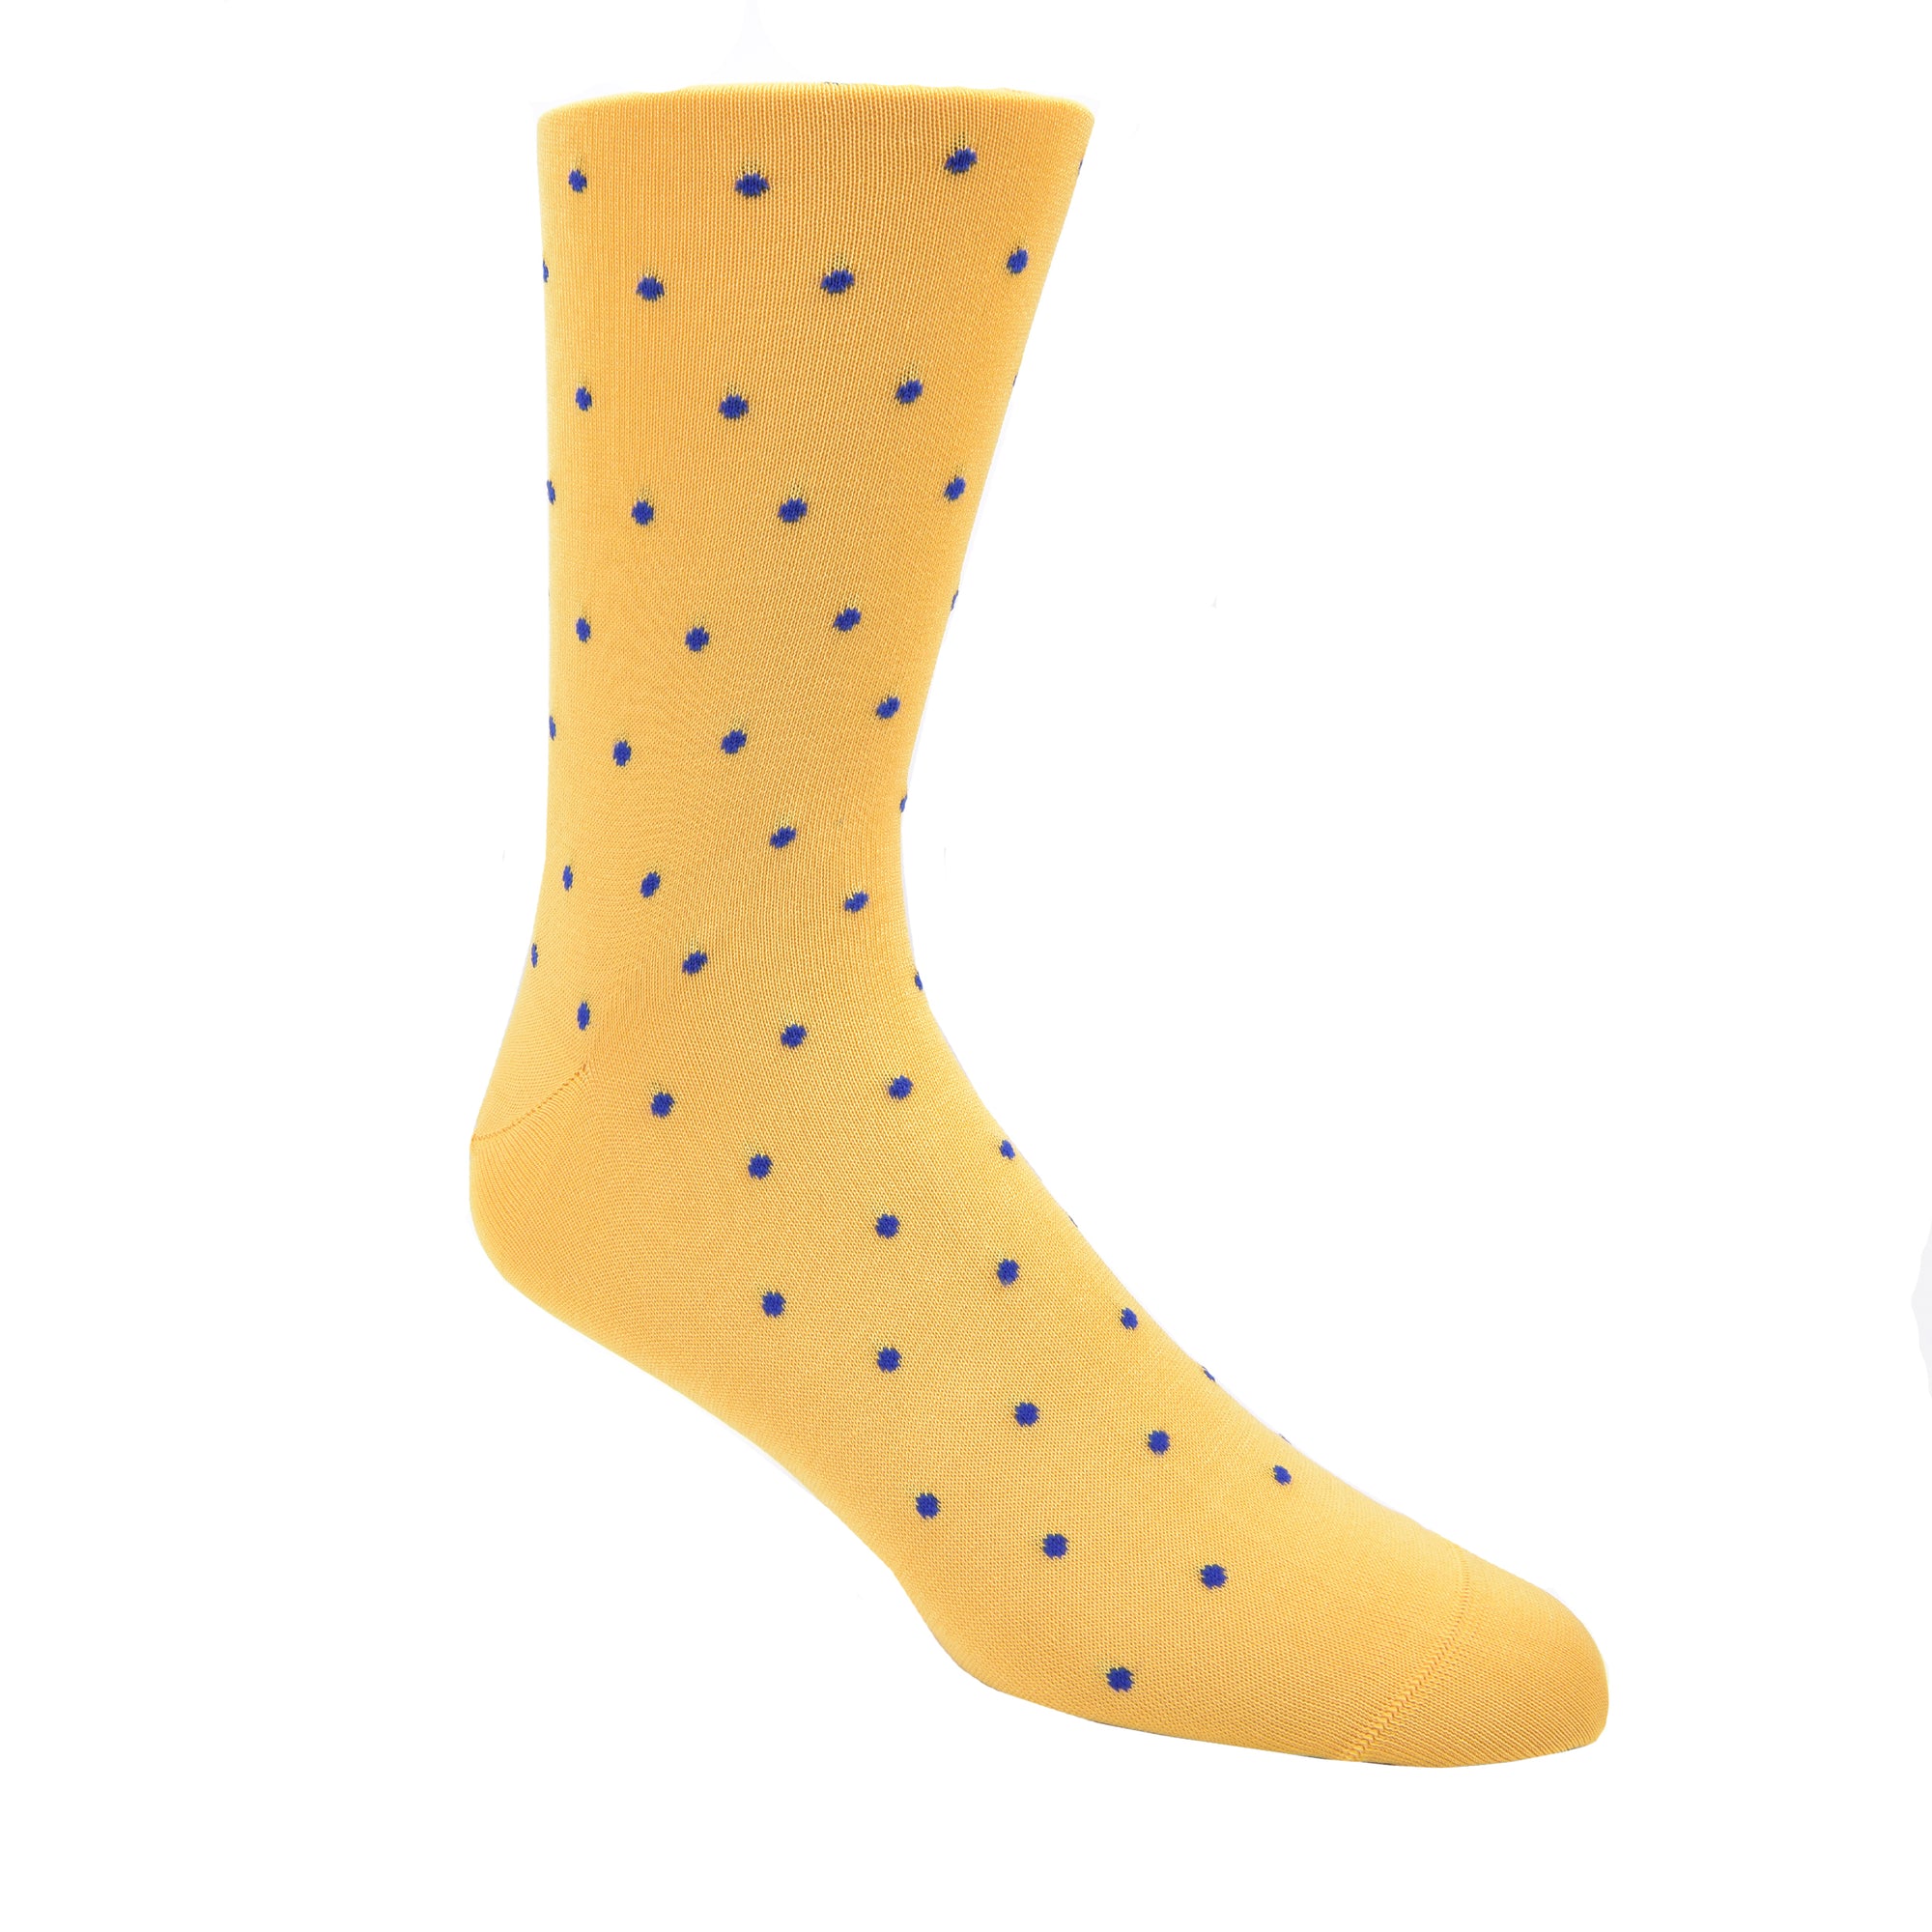 Dots on dots on dots. Life is too short to wear boring socks! Life is too short to wear boring socks! #damnright  70% Mercerized Cotton 29% Nylon 1% Spandex Fits Size 8-12 Machine Washable Made in the USA